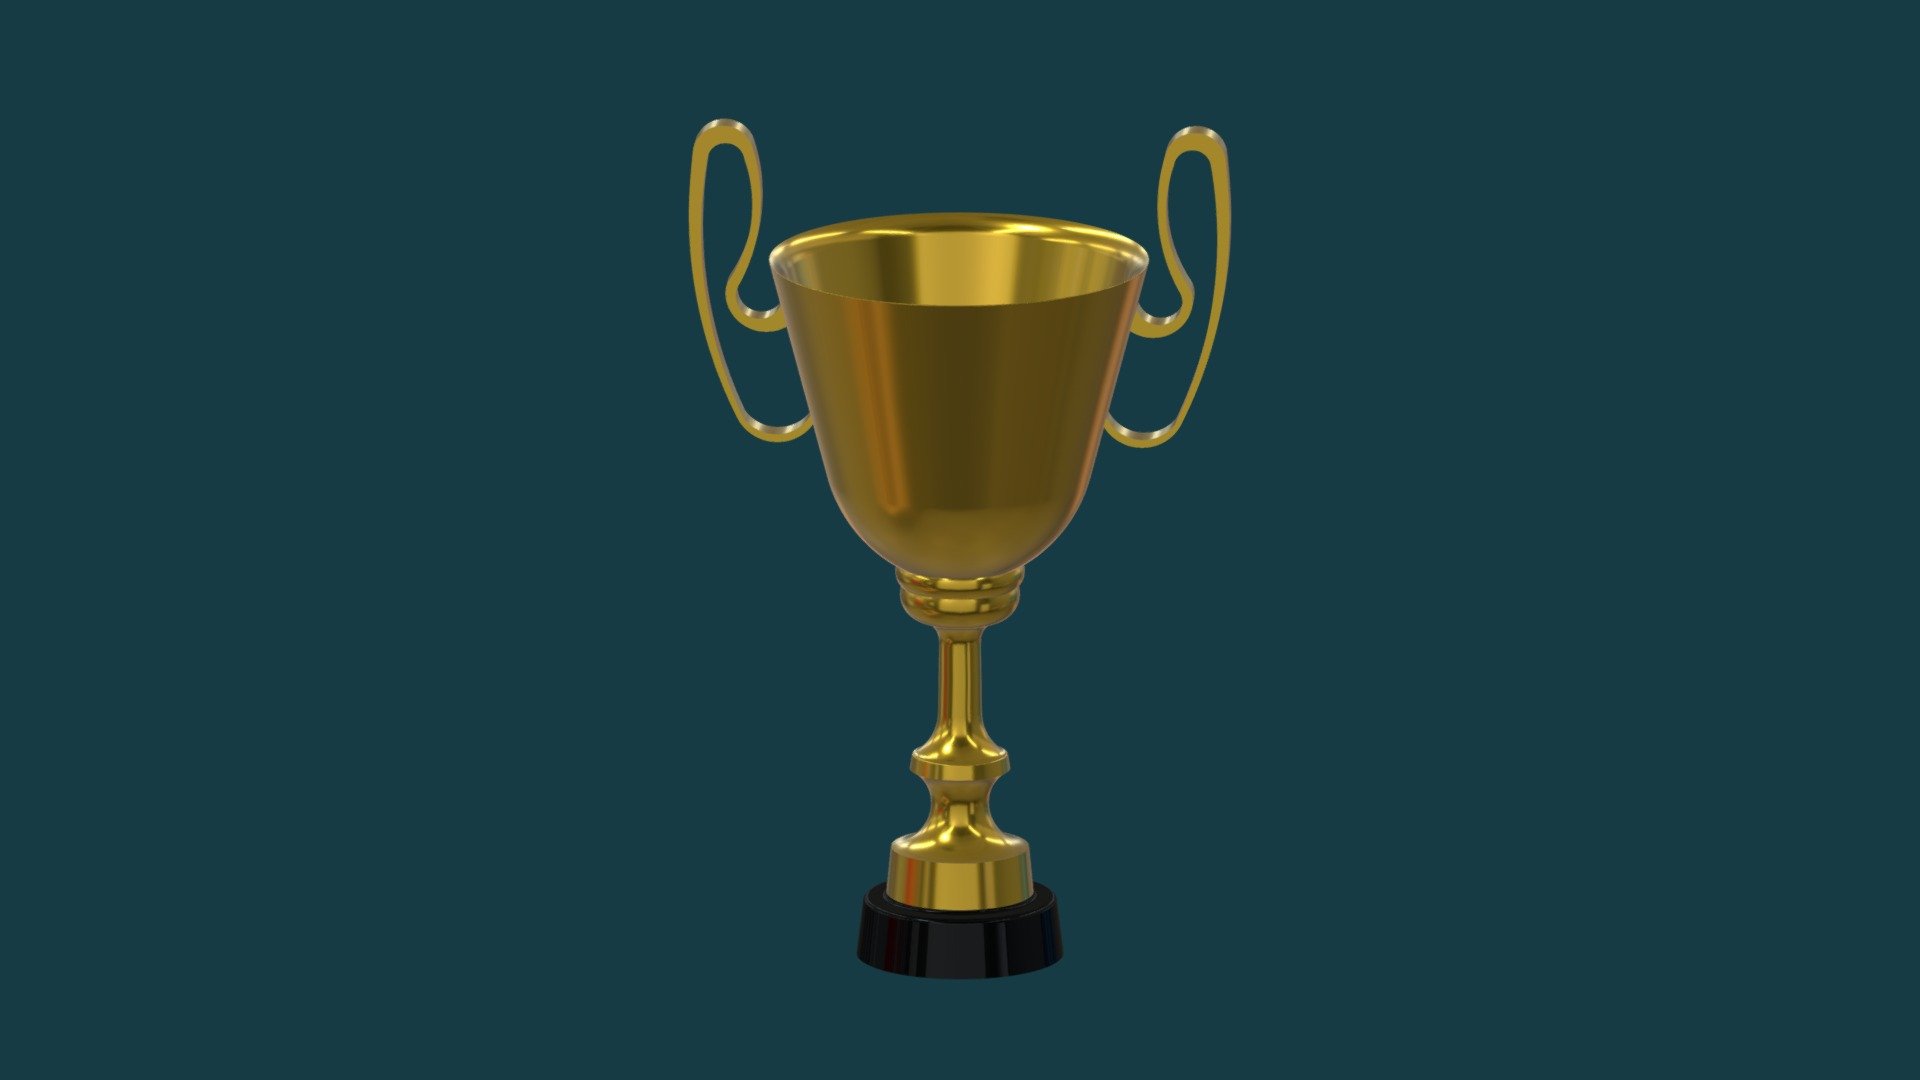 Gold Trophy with base. Enjoy the free download - Comment what you want to see next 3d model